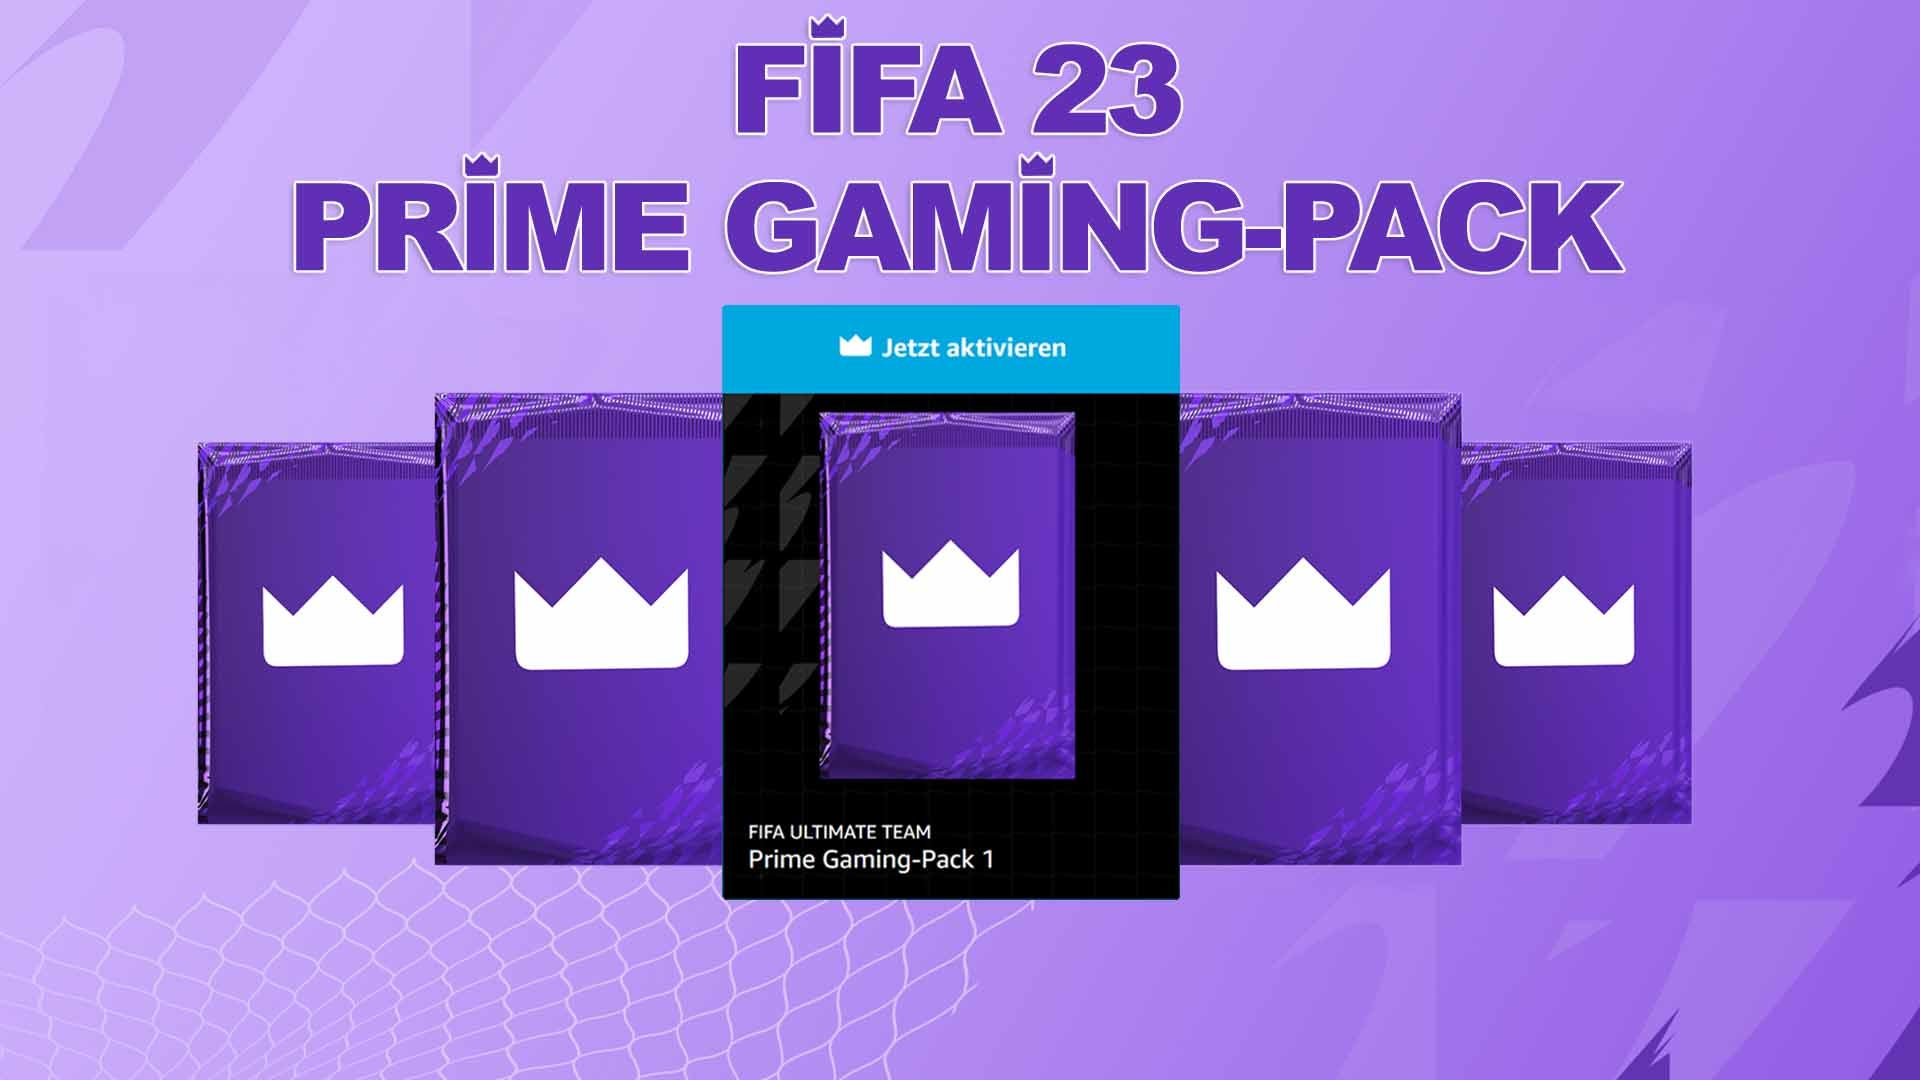 FIFA 23: Prime Gaming Pack – When will the first trophy come?